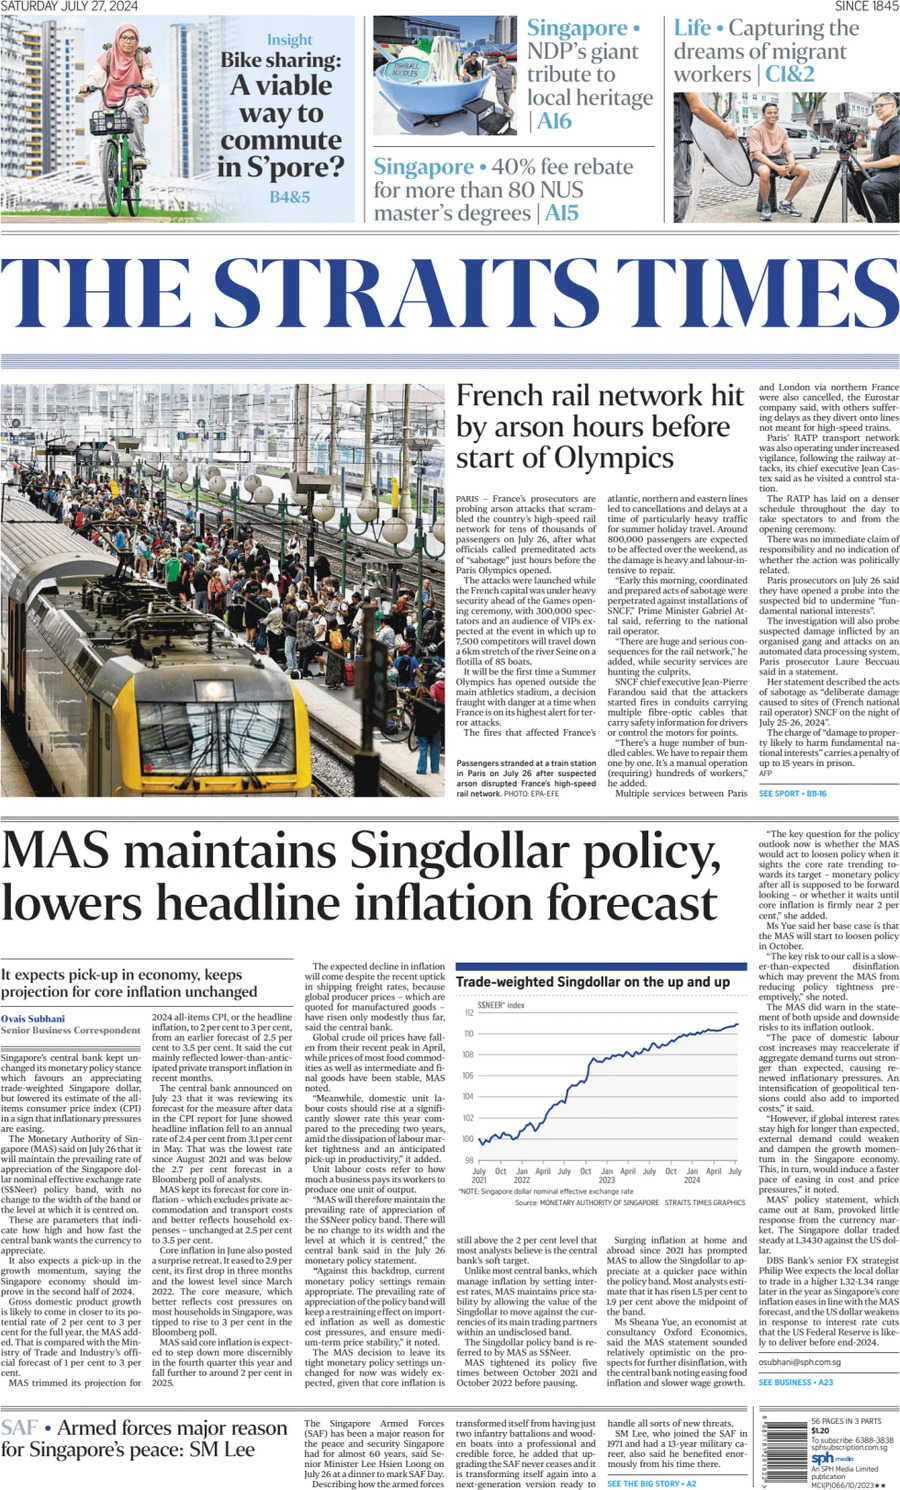 The Straits Times - Front Page - 07/27/2024